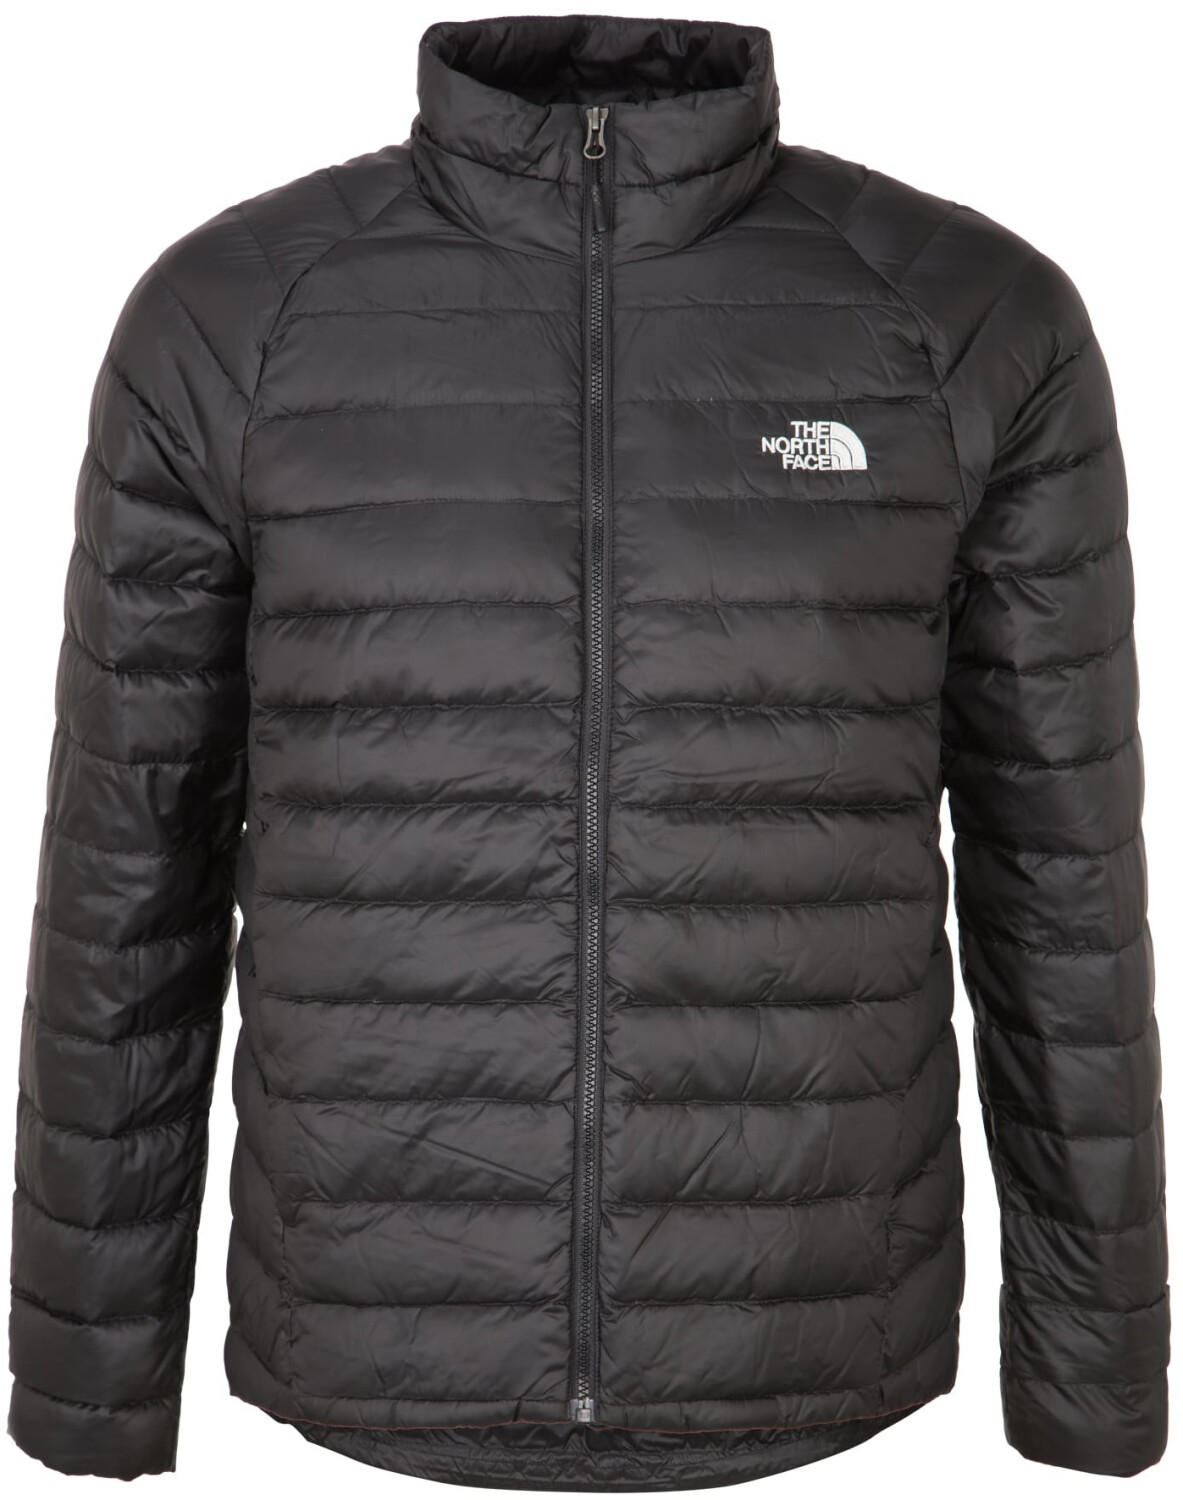 Buy The North Face Trevail Jacket from £160.00 (Today) – Best Deals on ...